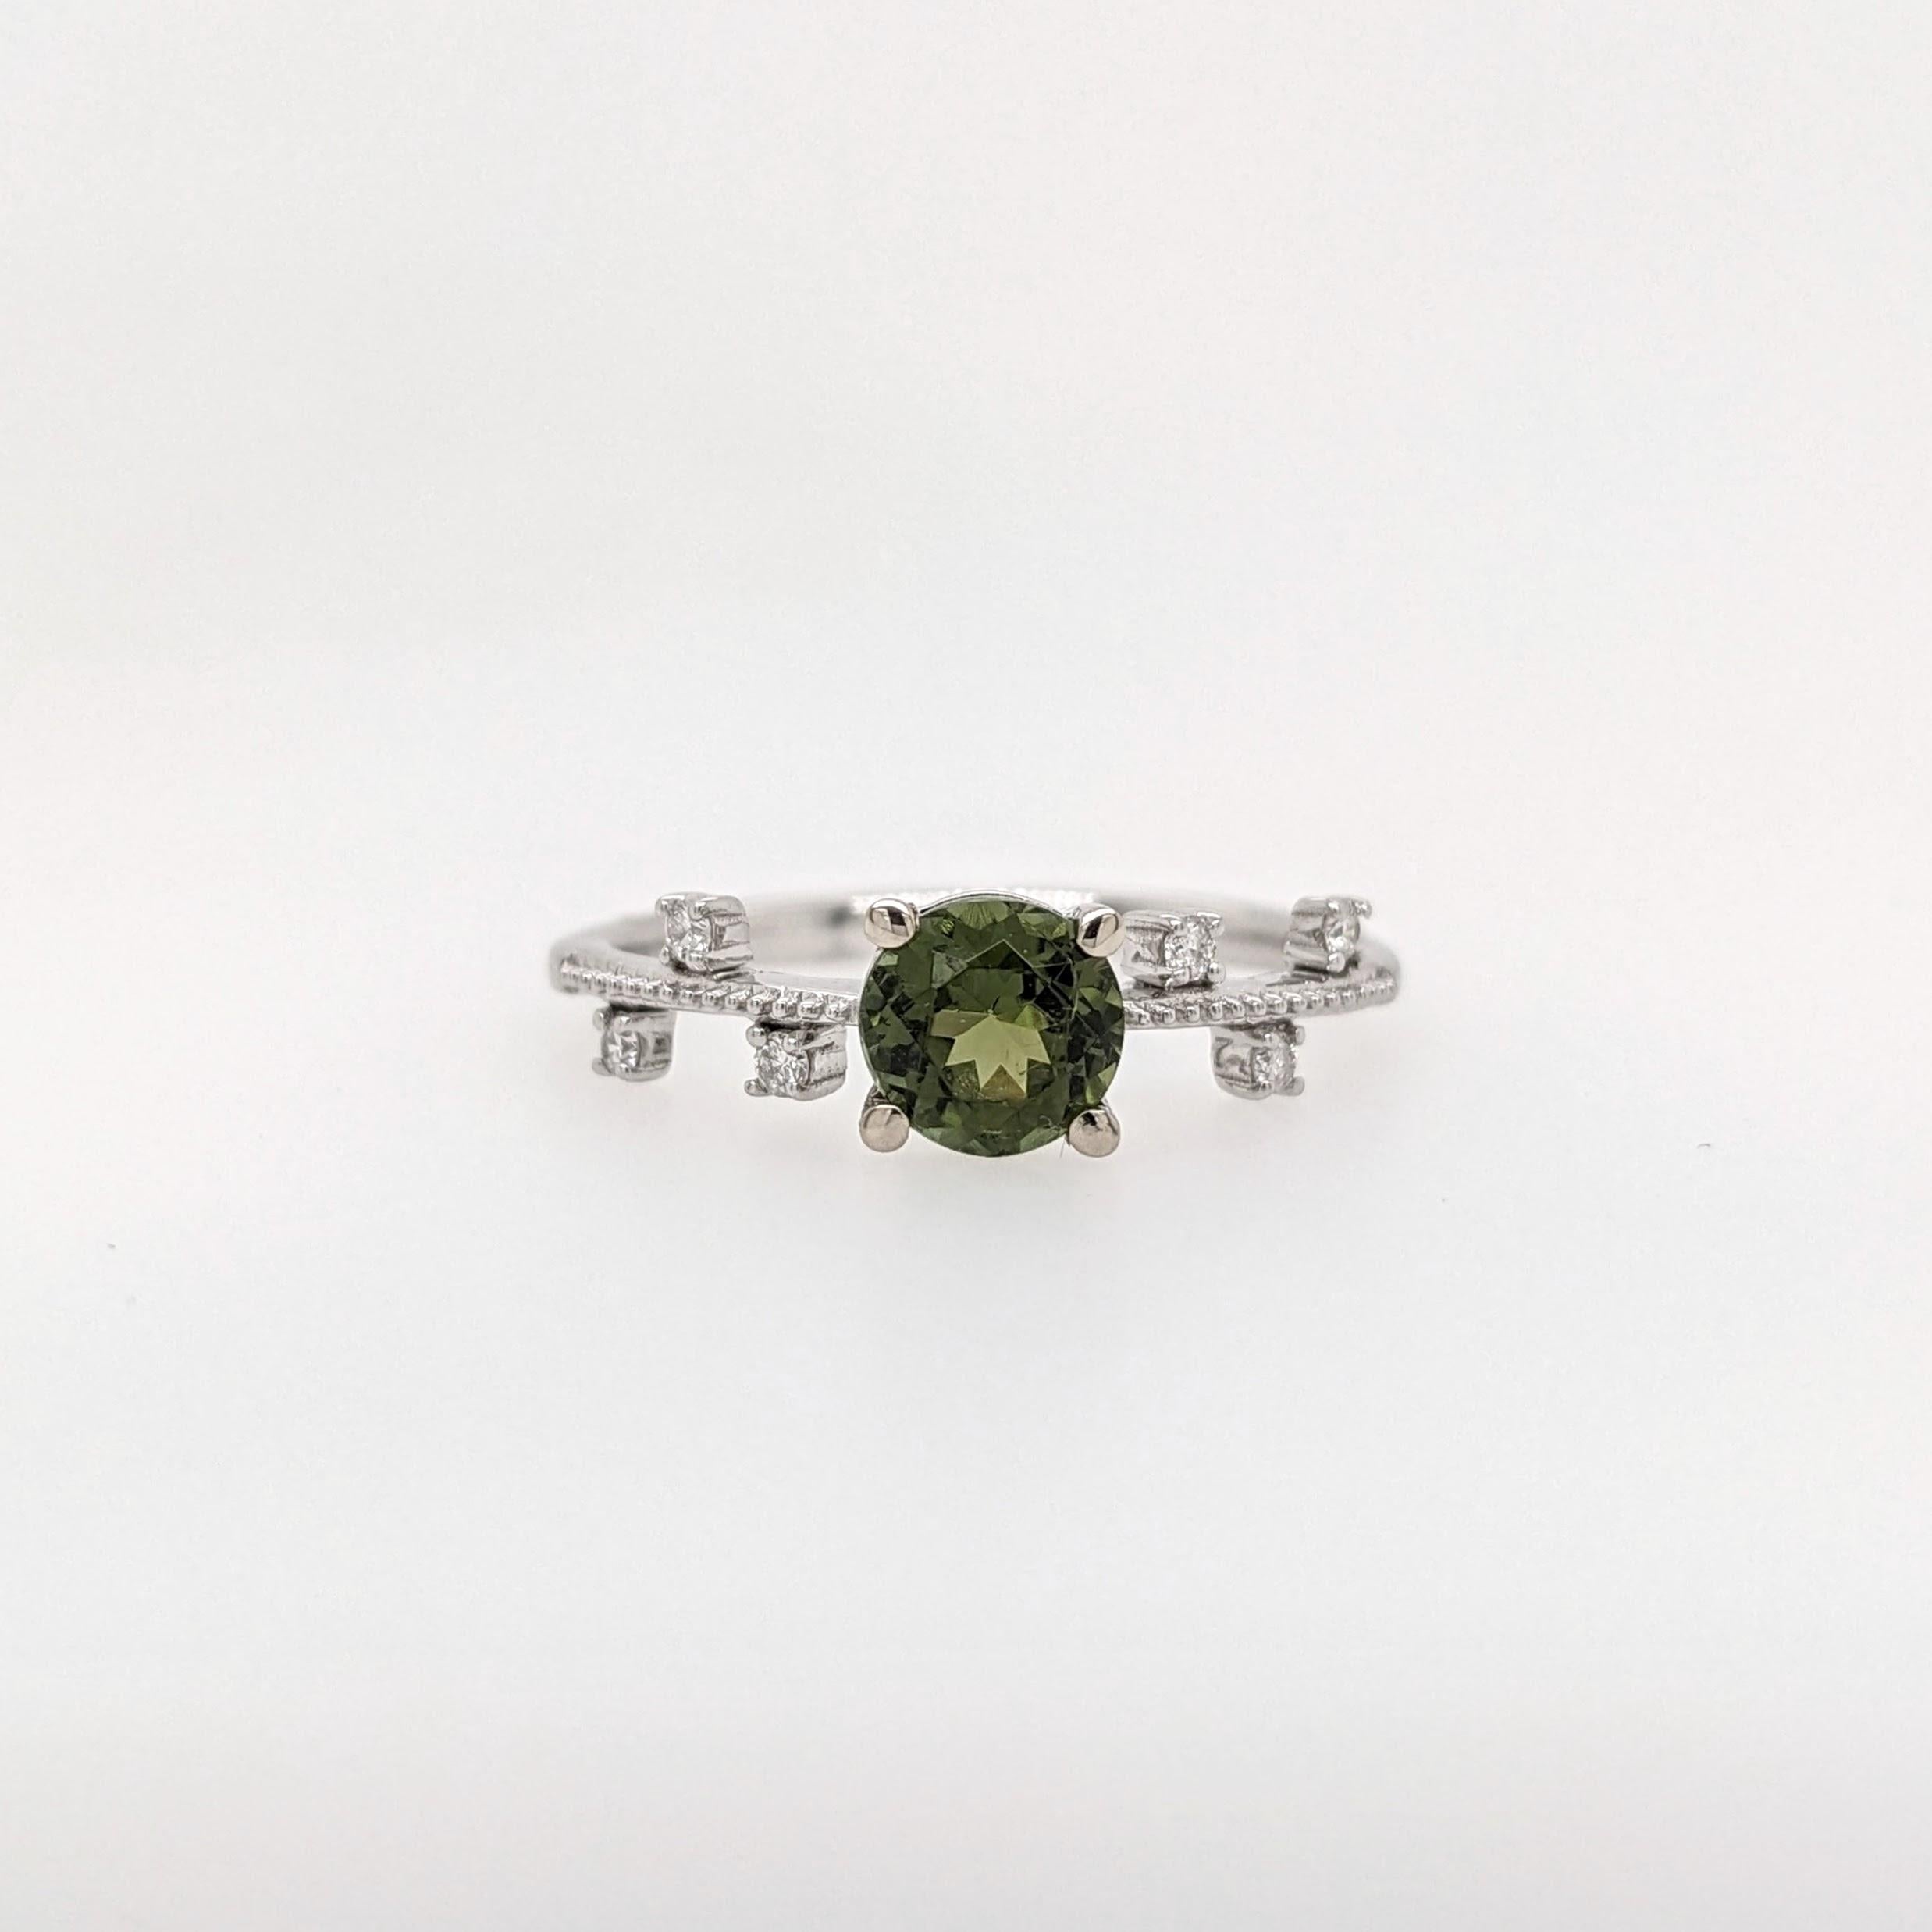 Green Tourmaline Ring w Earth Mined Diamonds in Solid 14K White Gold Round 5.5mm